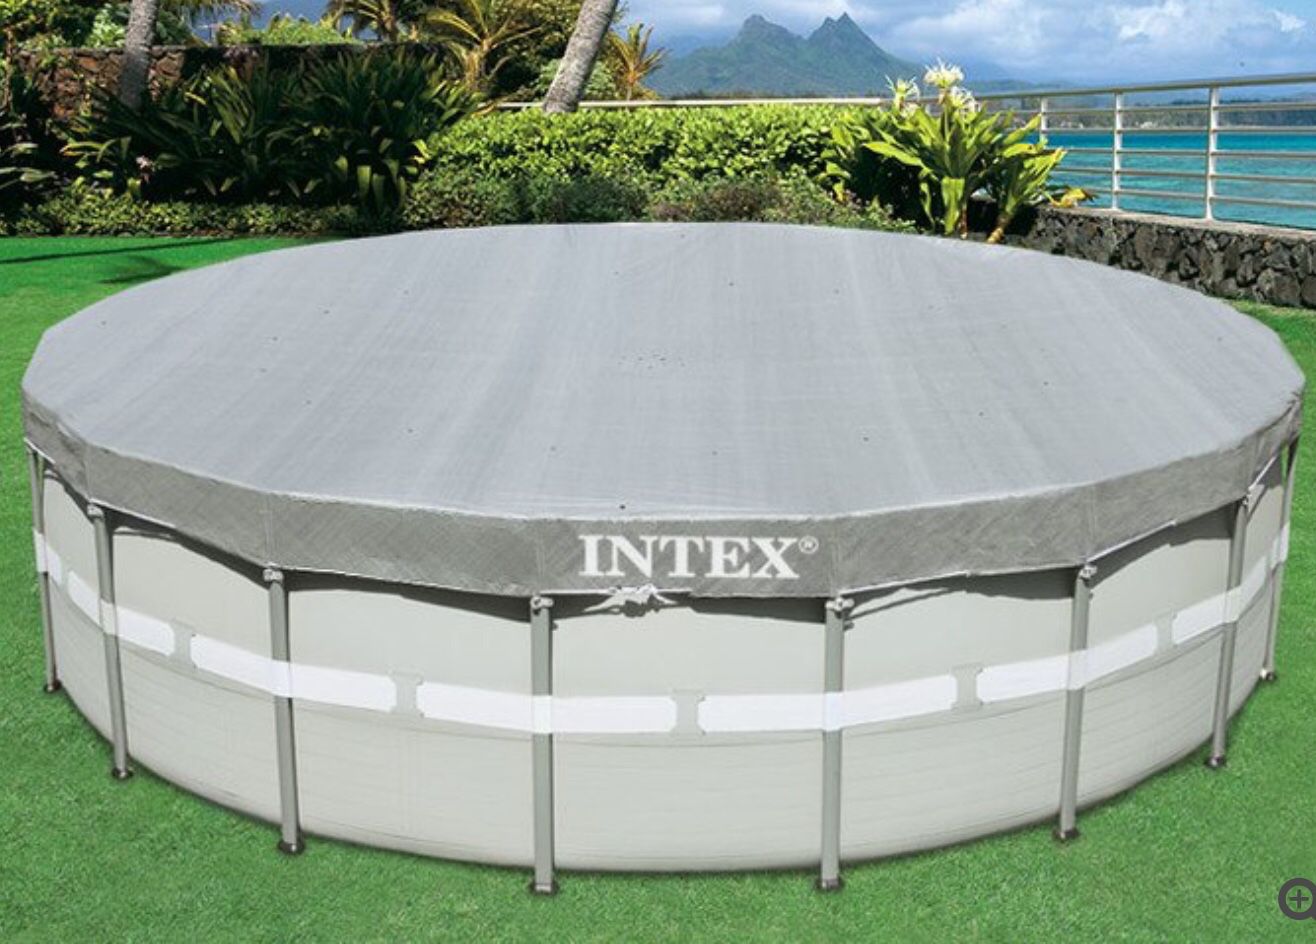 POOL COVER : Intex 18ft Round Above Ground Pool Cover. Brand New In The Box.